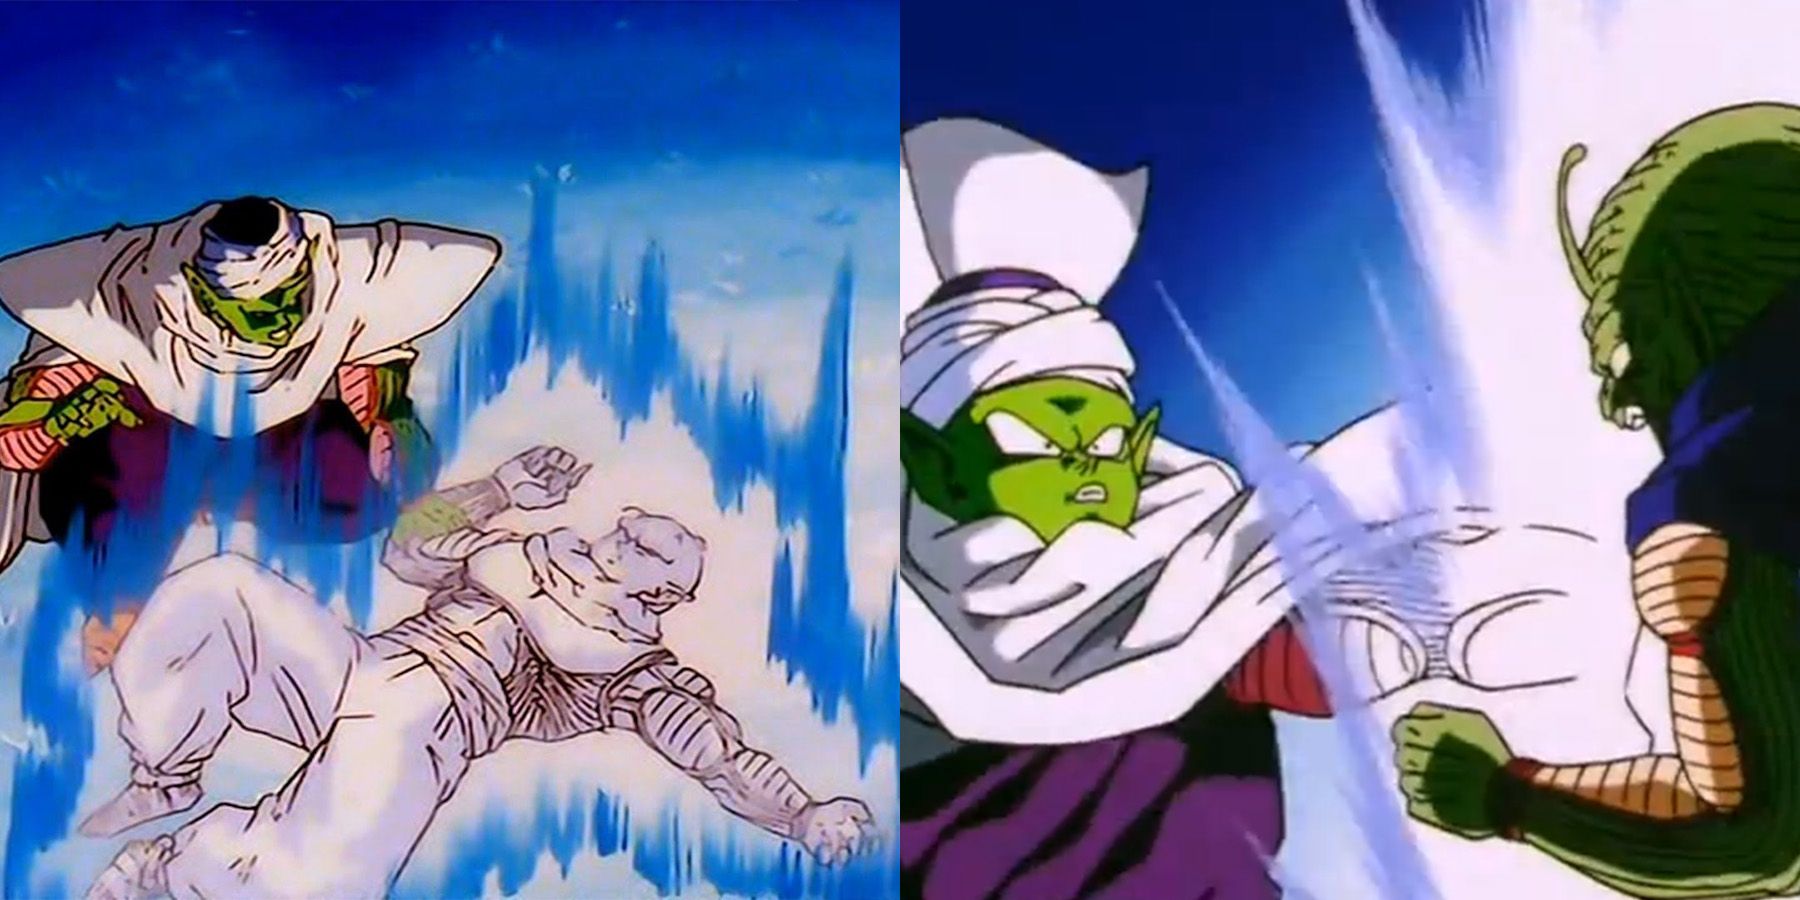 Piccolo fusing with Nail (left) and Kami (right)